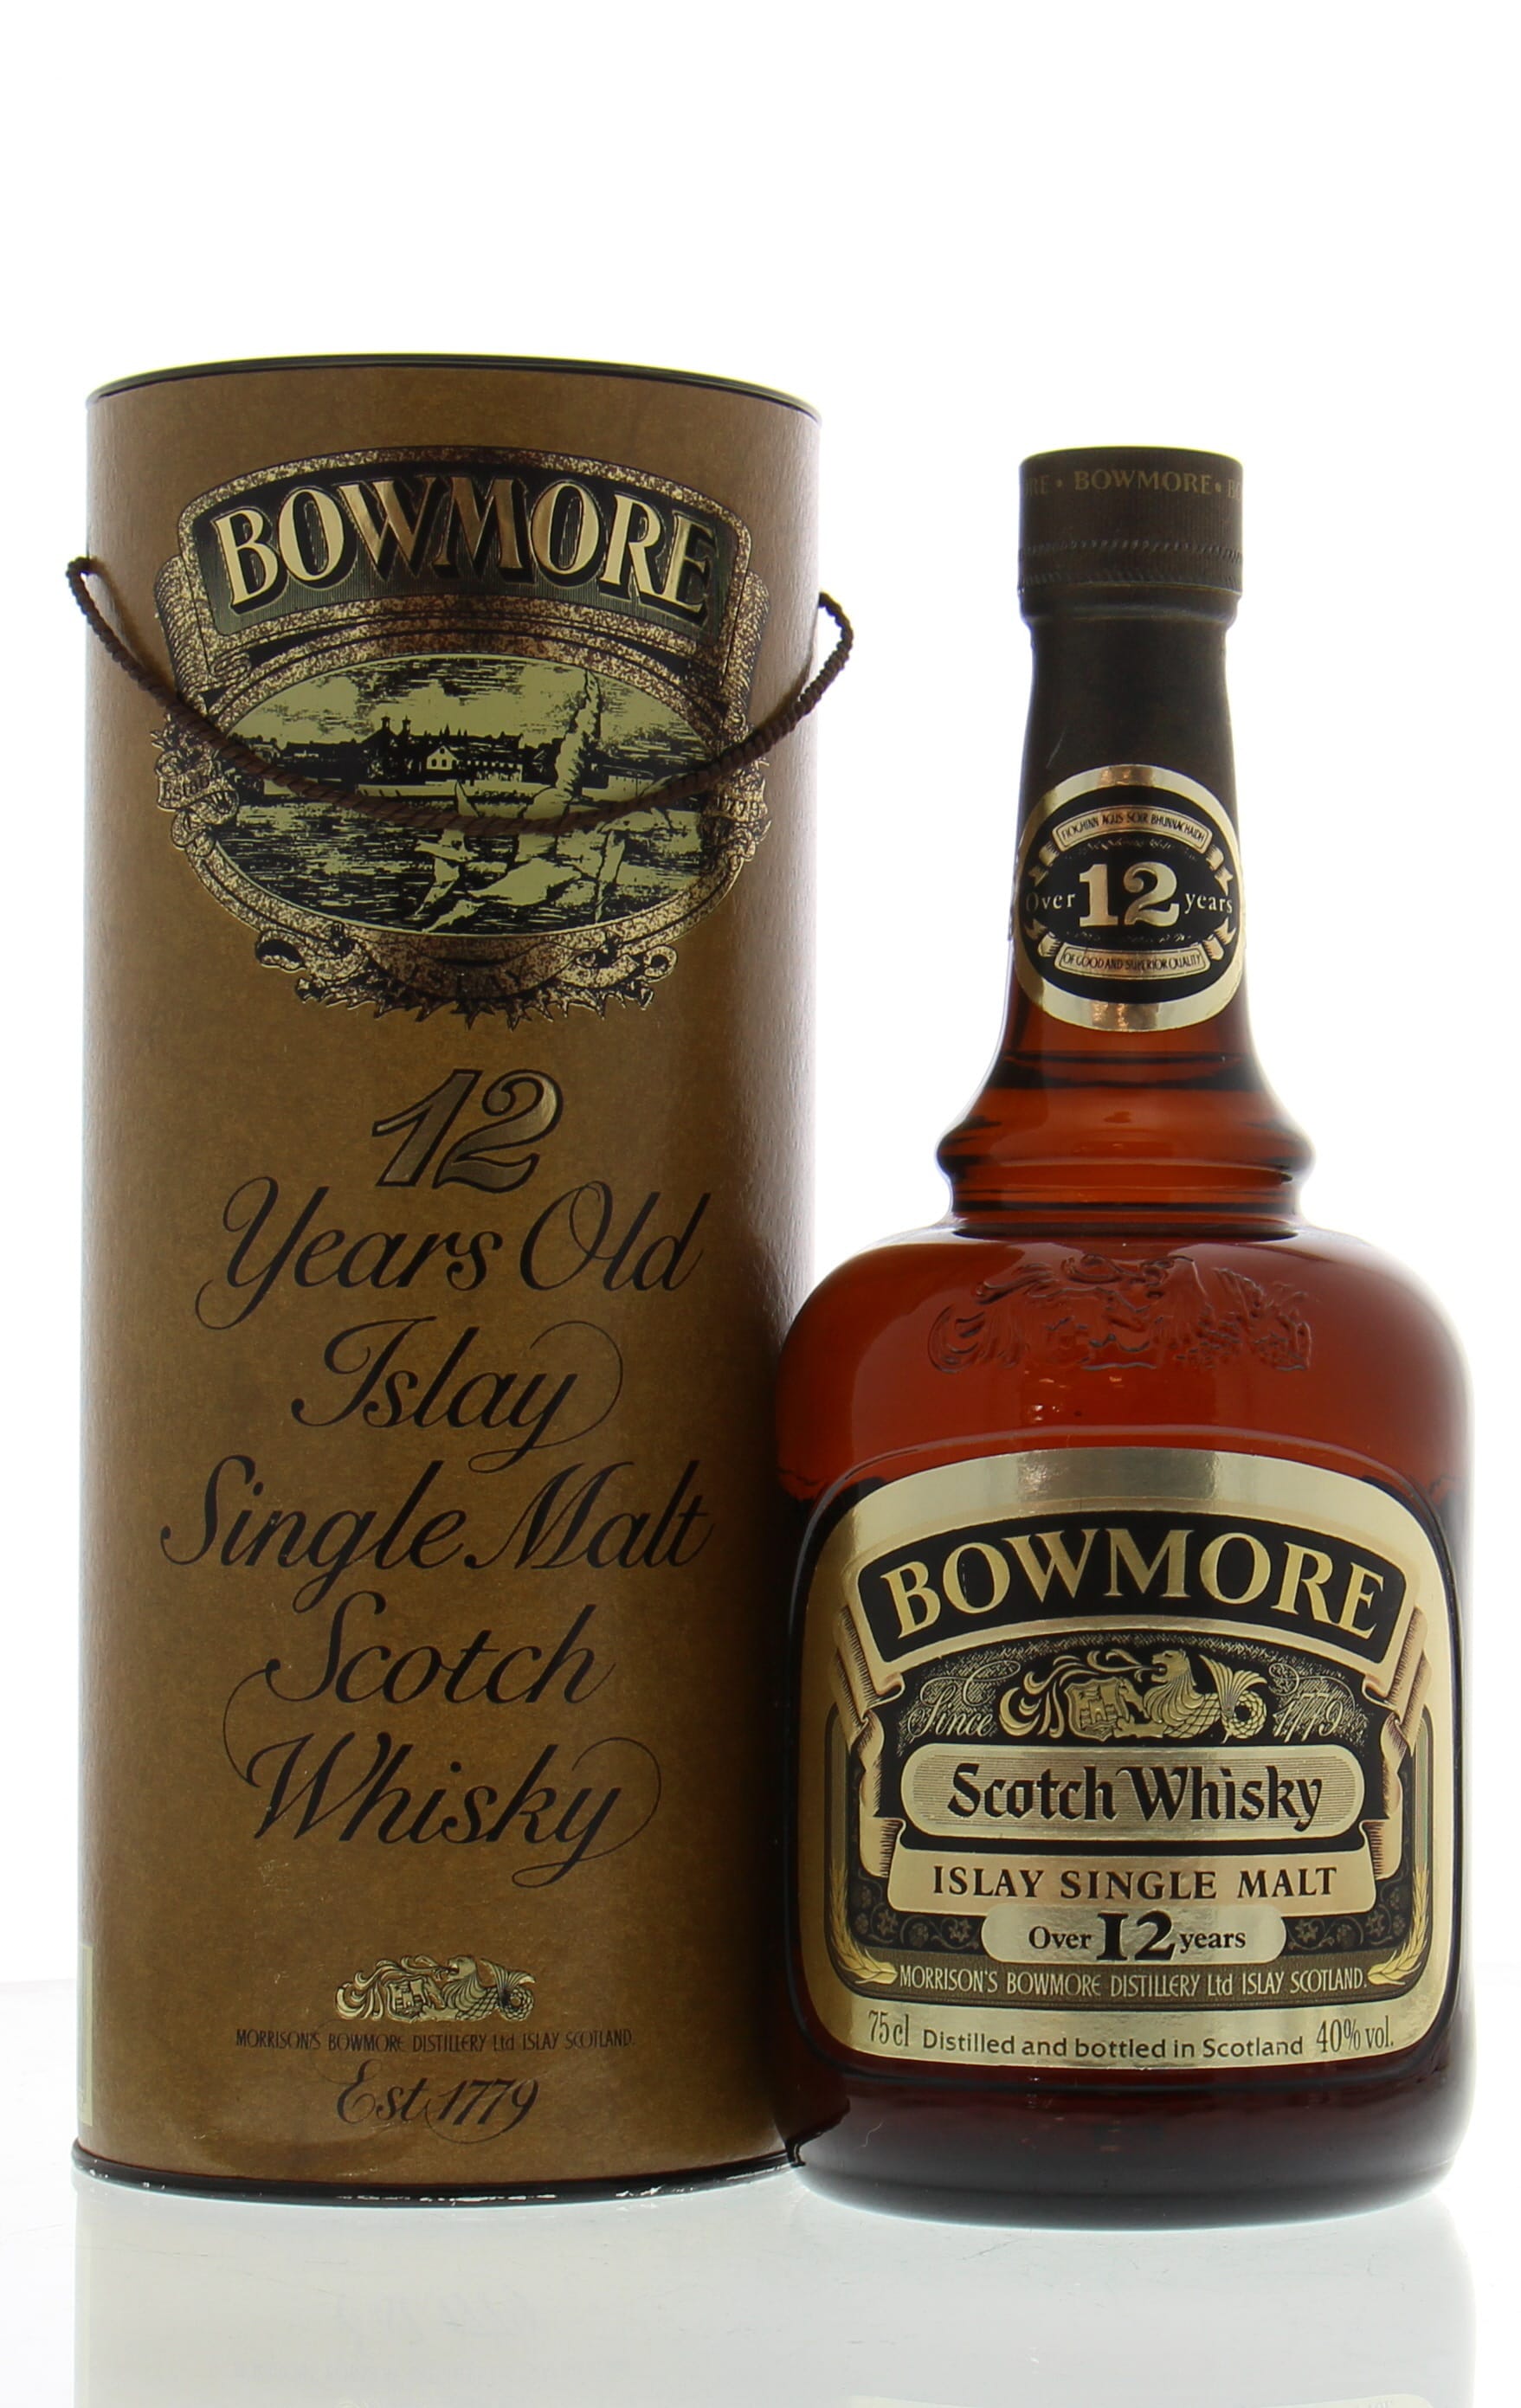 Bowmore - 12 Years Old Dumpy Brown Bottle - Gold label - Cork stopper 40% NV In Original Container